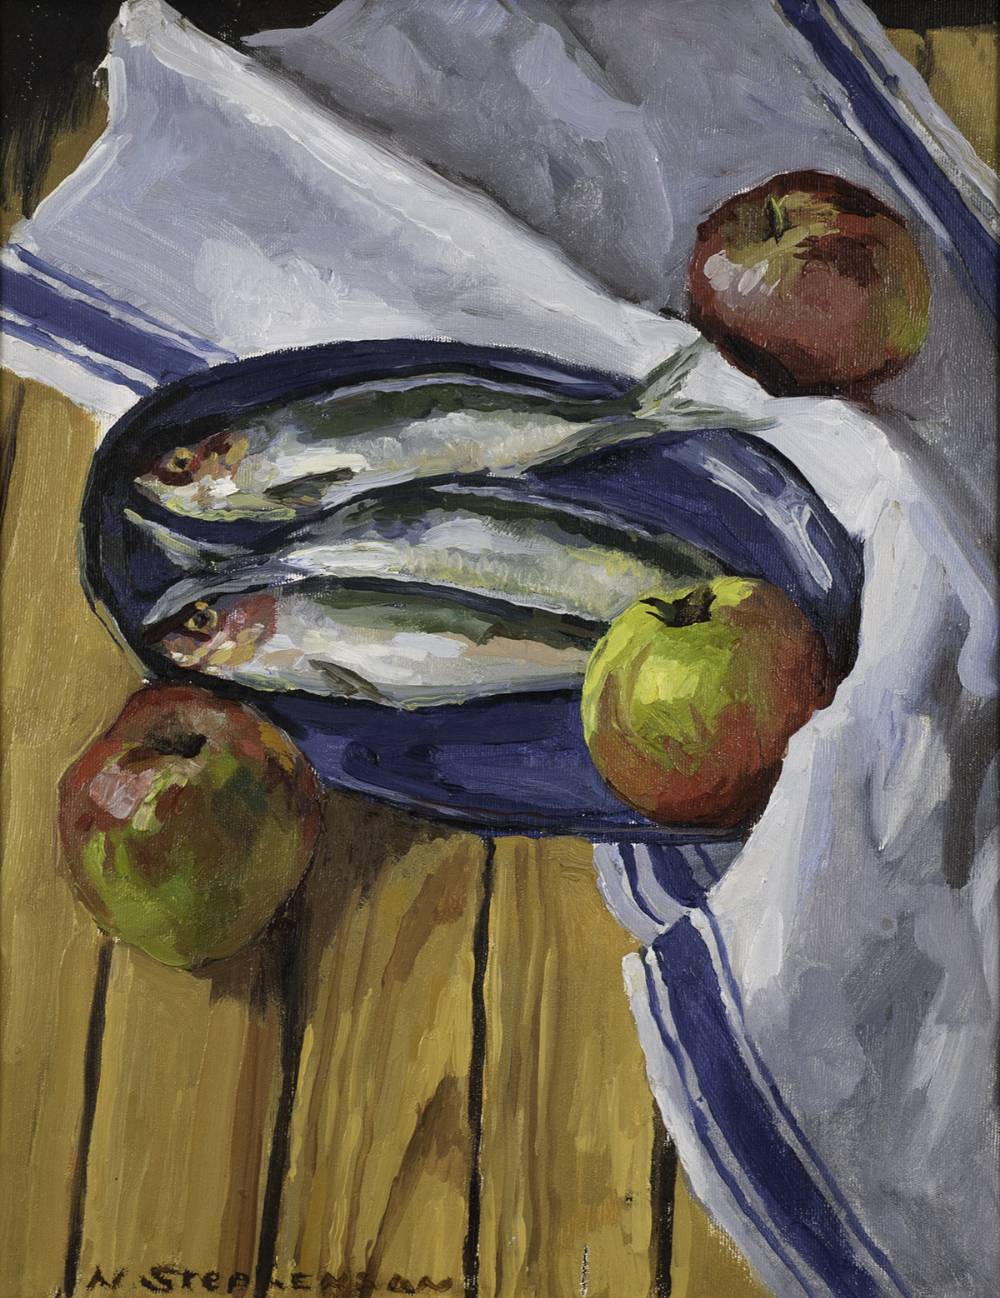 FRUIT OF THE SEA by Nuala Stephenson (1921-2010) (1921-2010) at Whyte's Auctions